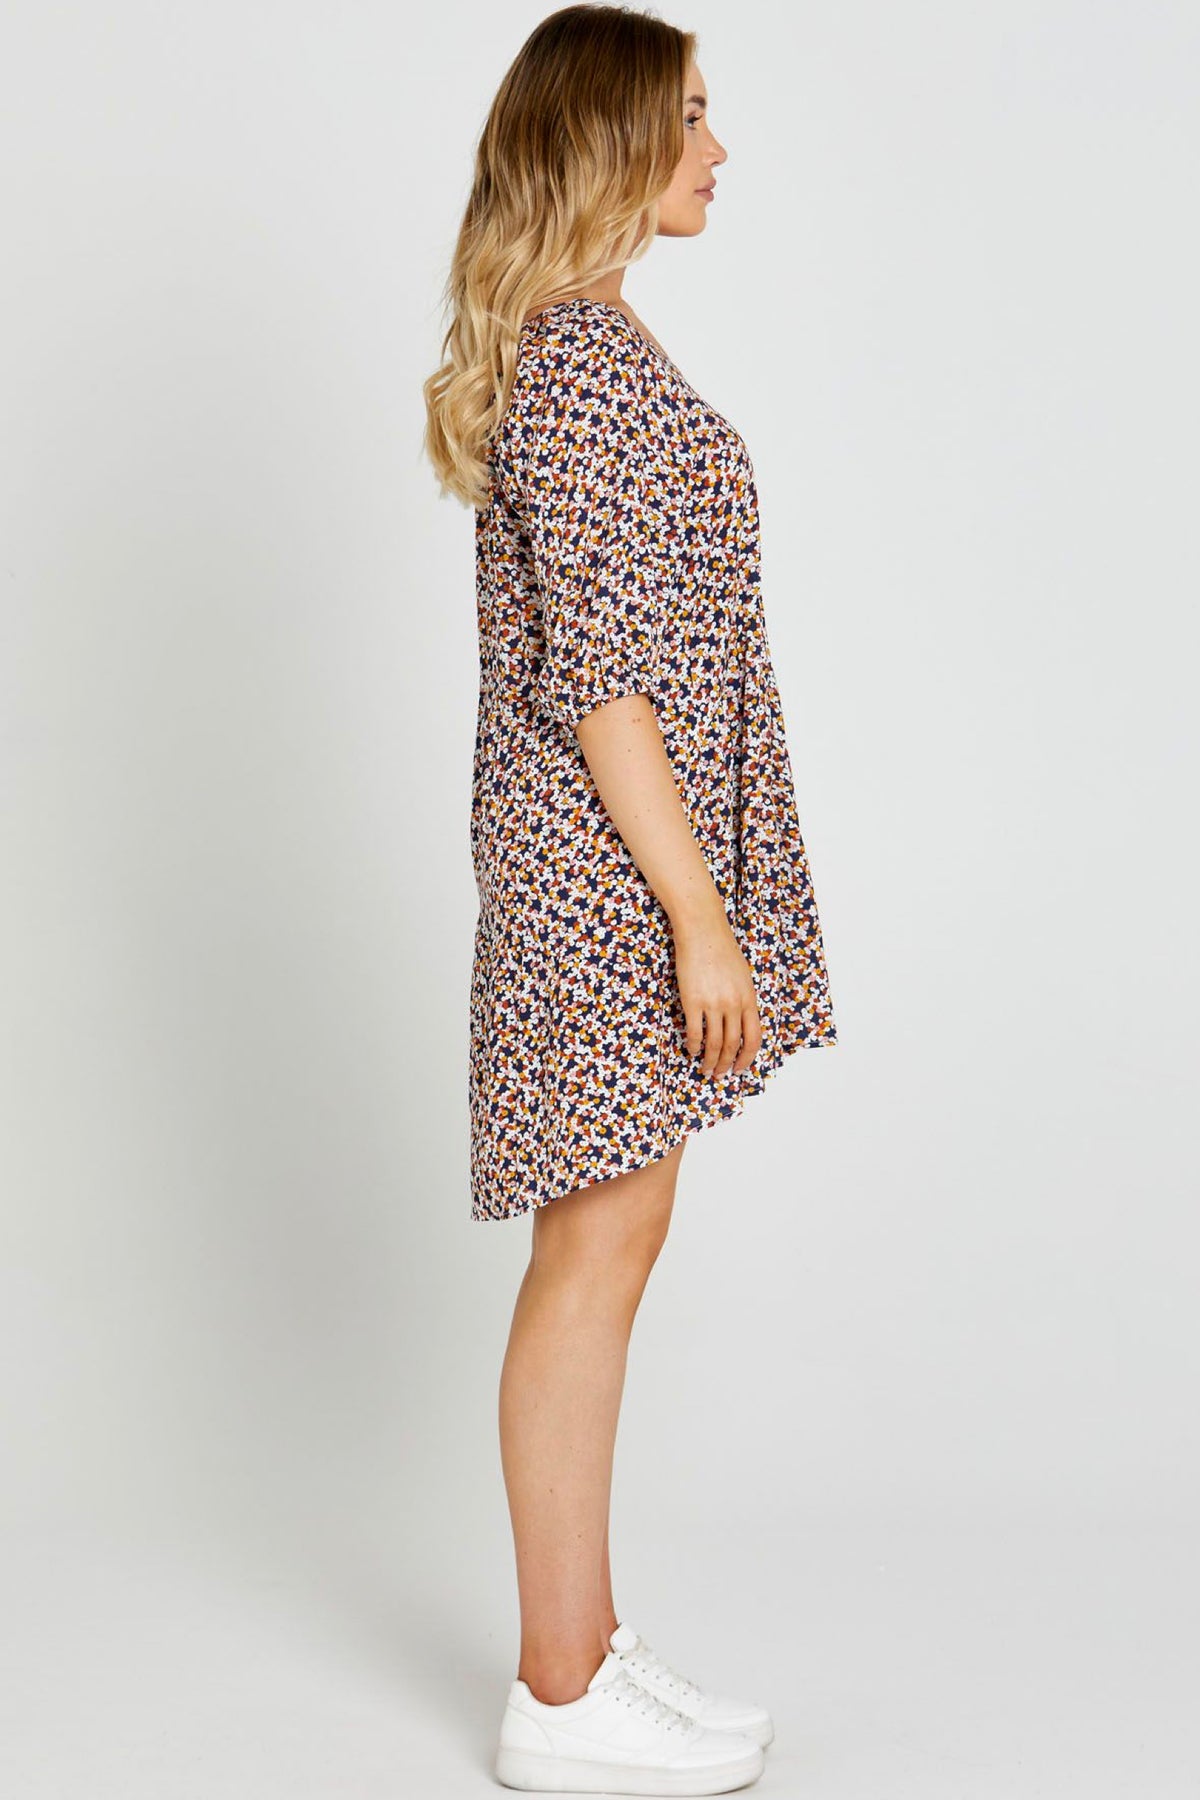 Isobelle Tiered Mini Dress Navy Floral Ditsy